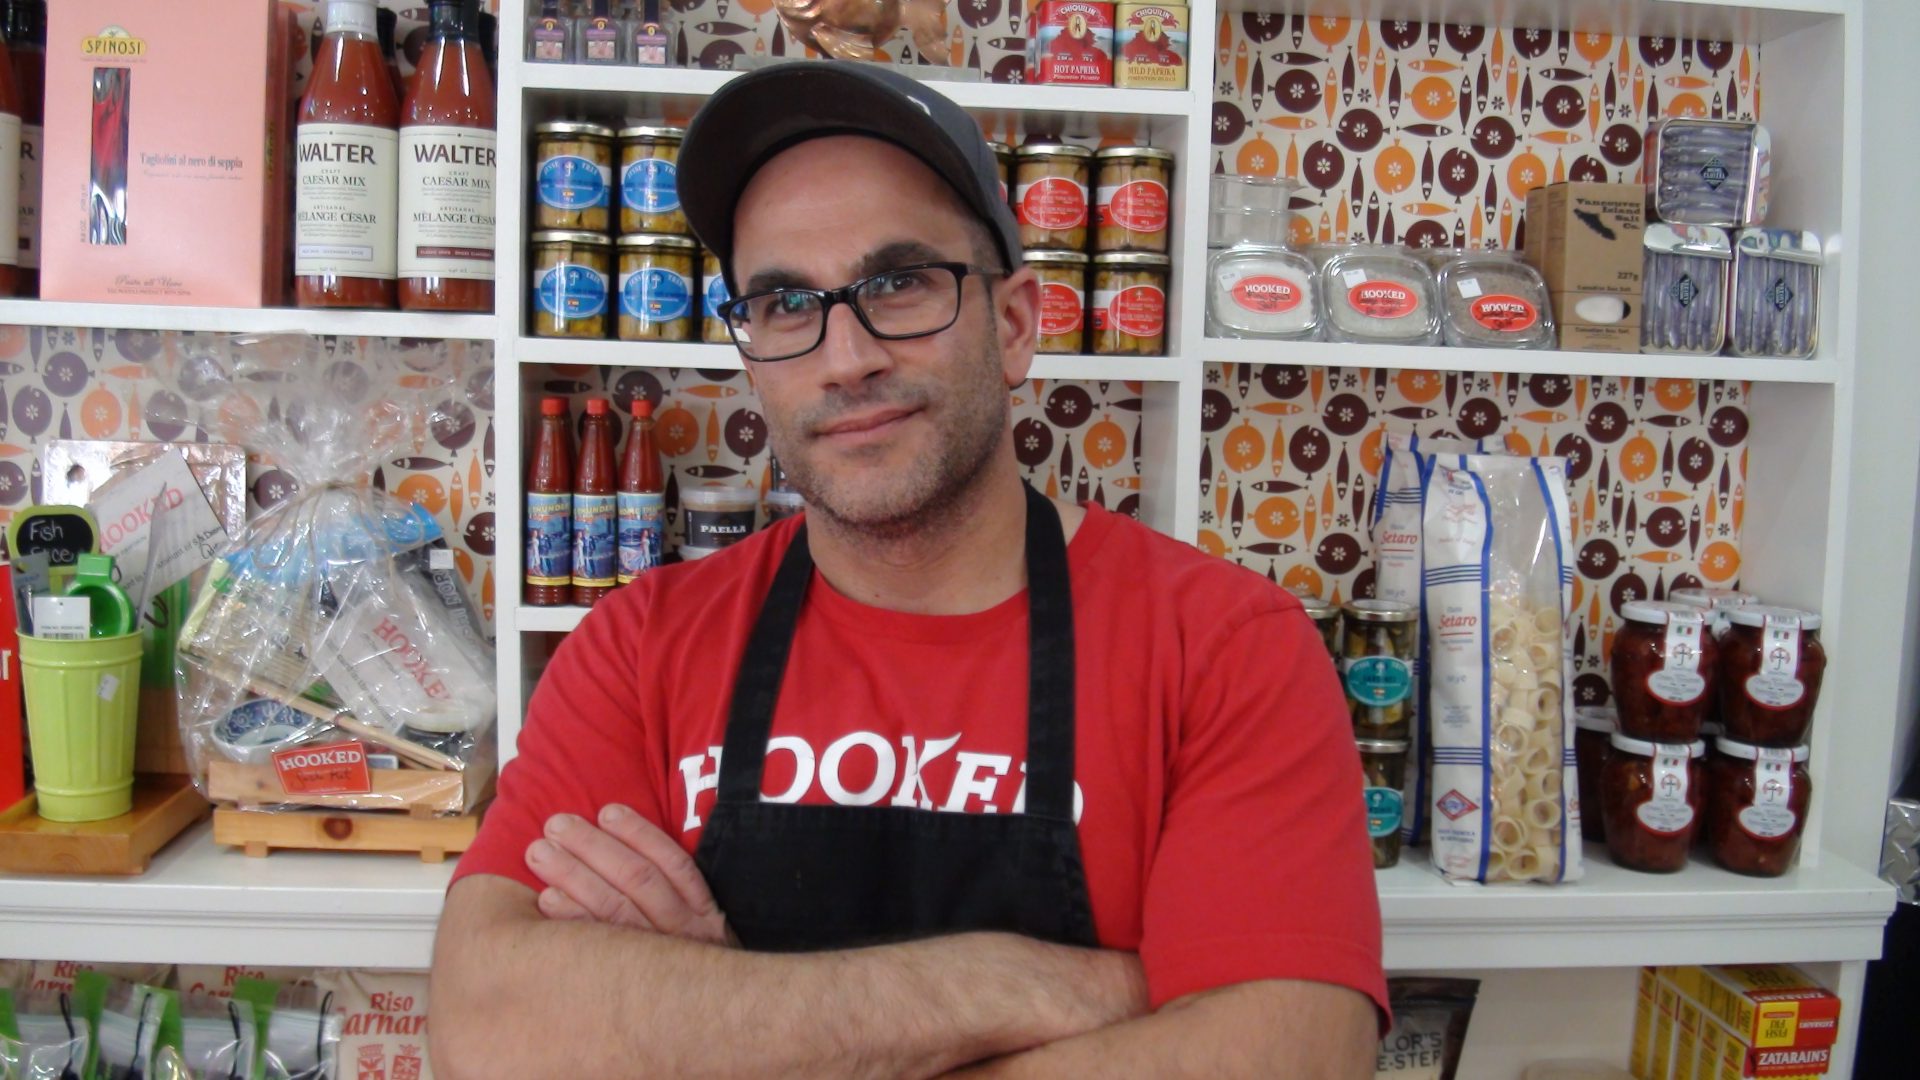 Chef Daniel Muia shows us some of his favourite sustainable fish at Hooked on the Danforth.